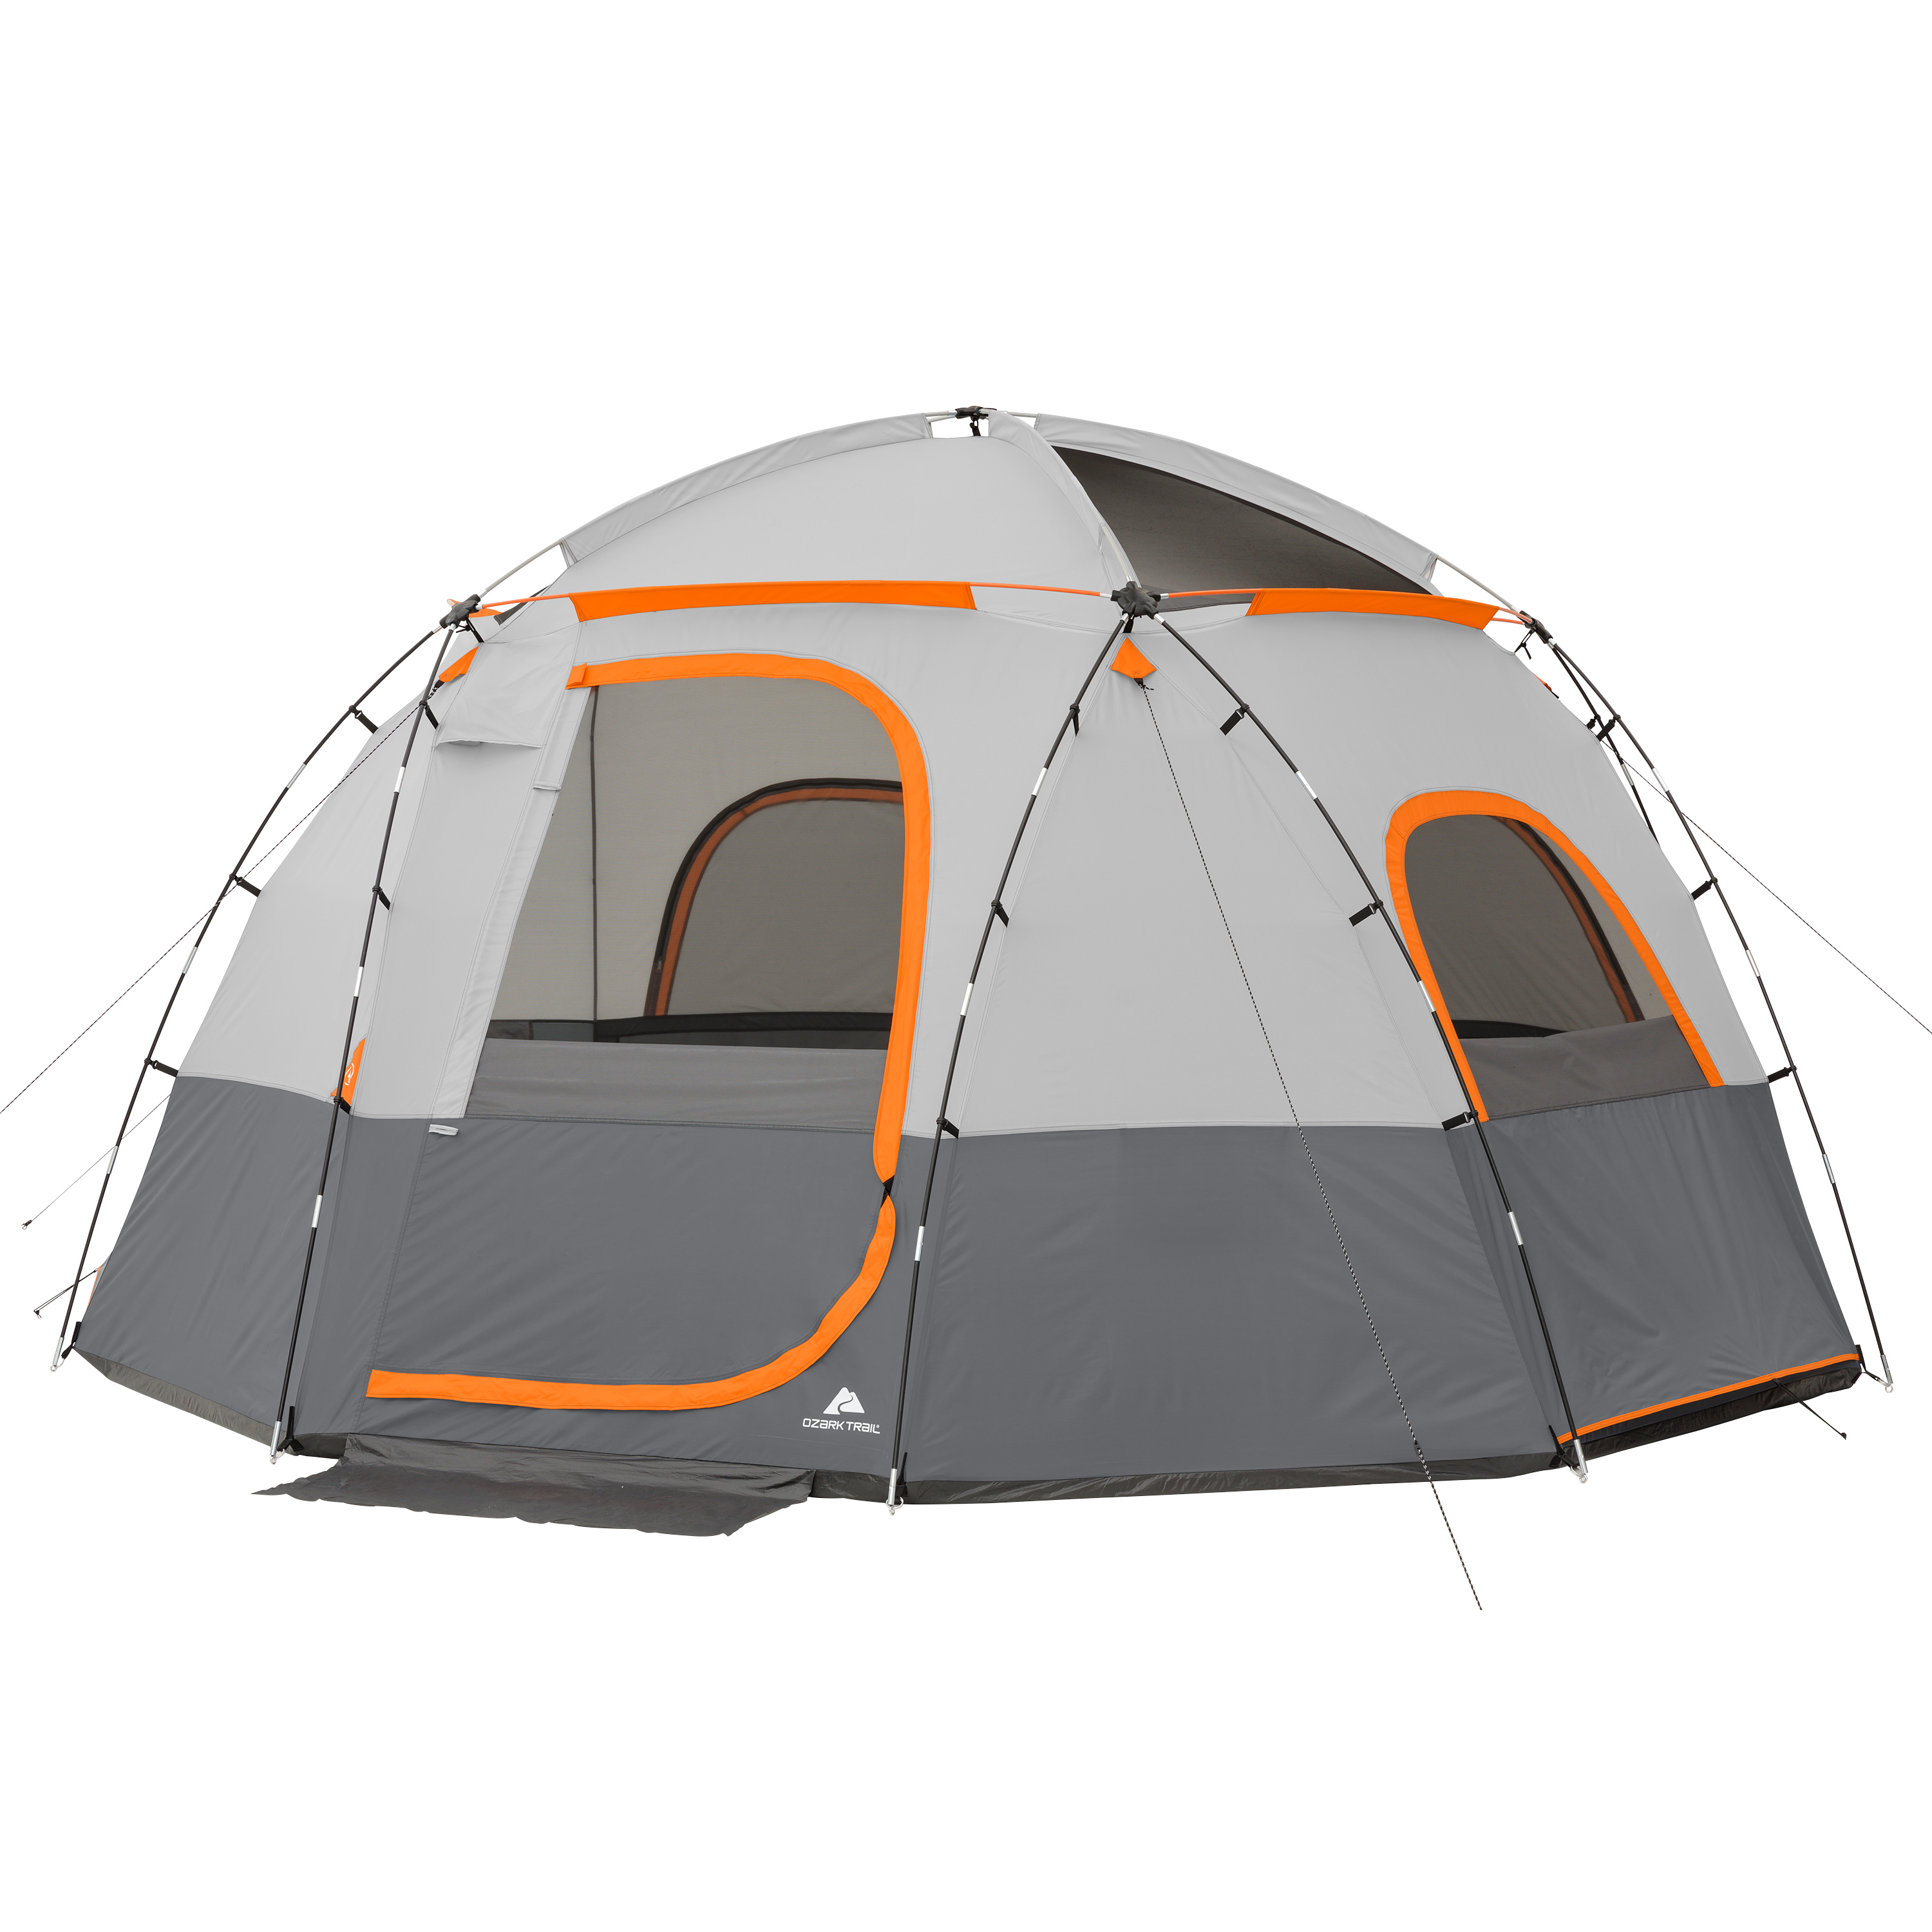 Ozark Trail 15’ x 15’ 9-Person Lighted Sphere Tent, 30.97 lbs - image 1 of 8